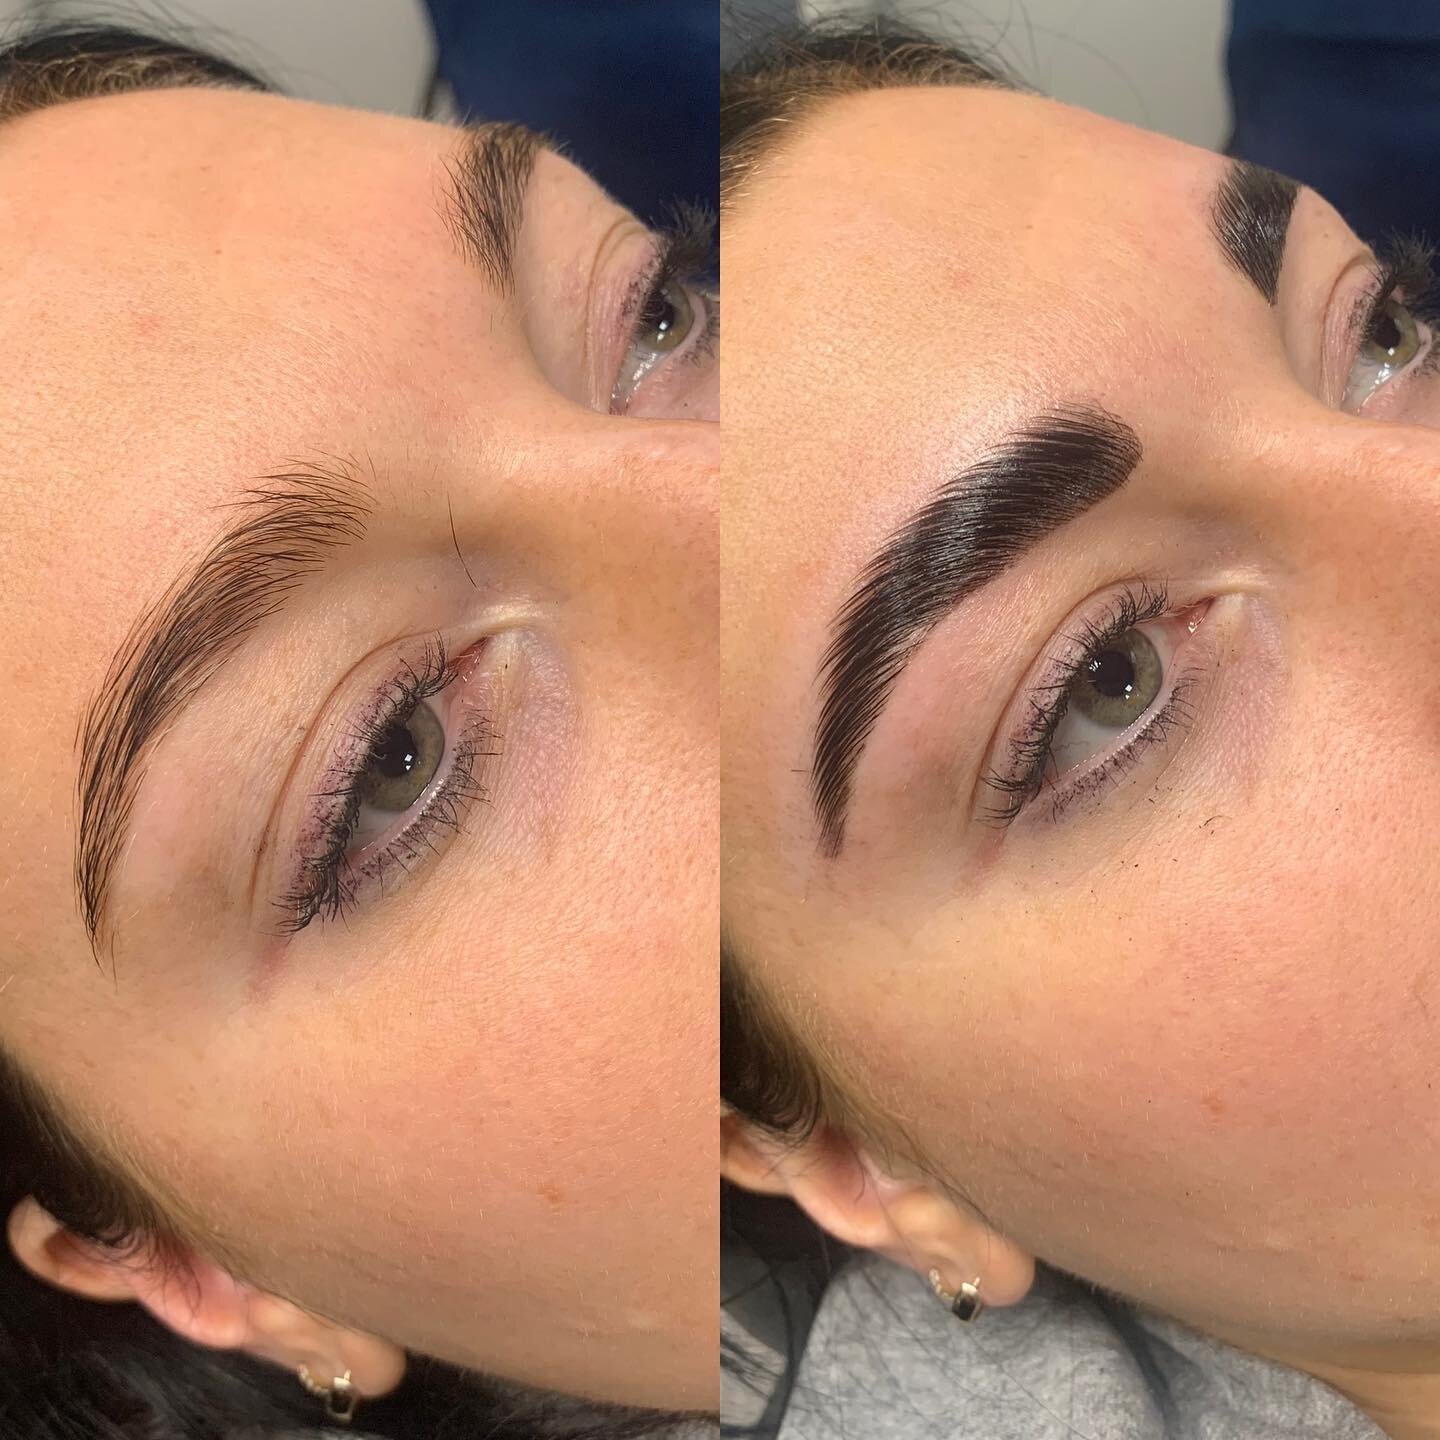 It&rsquo;s Brow Lamination Szn🌸🌿🌼

#thefacelabpgh #browlamination #beforeandafter #eyebrowthreading #browgoals #thuyanyc #pittsburghsalon #pittsburghspa